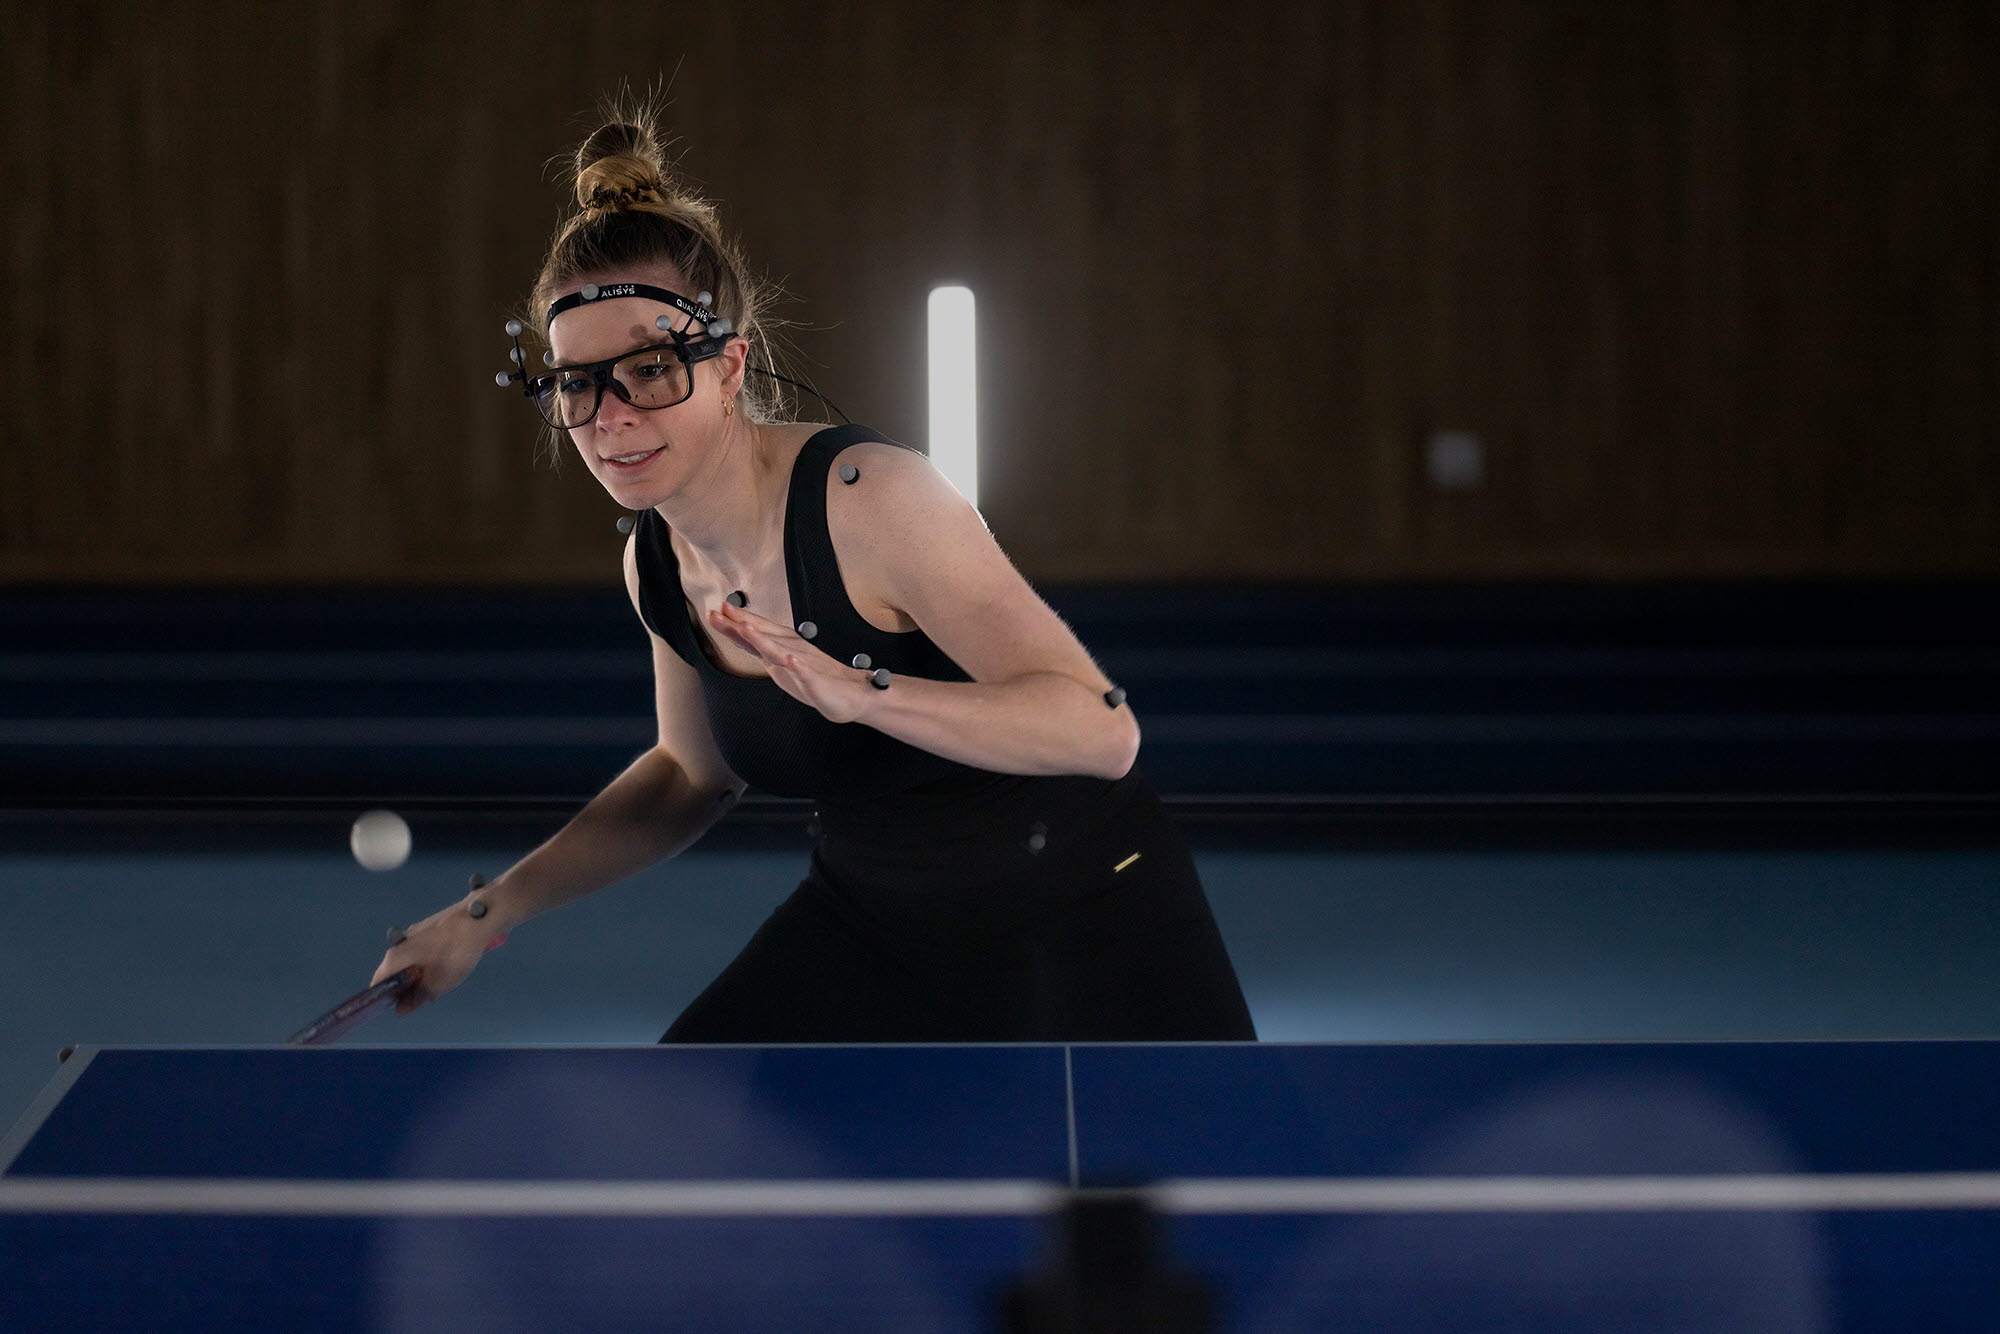 Qualysis motion capture - woman playing table tennis